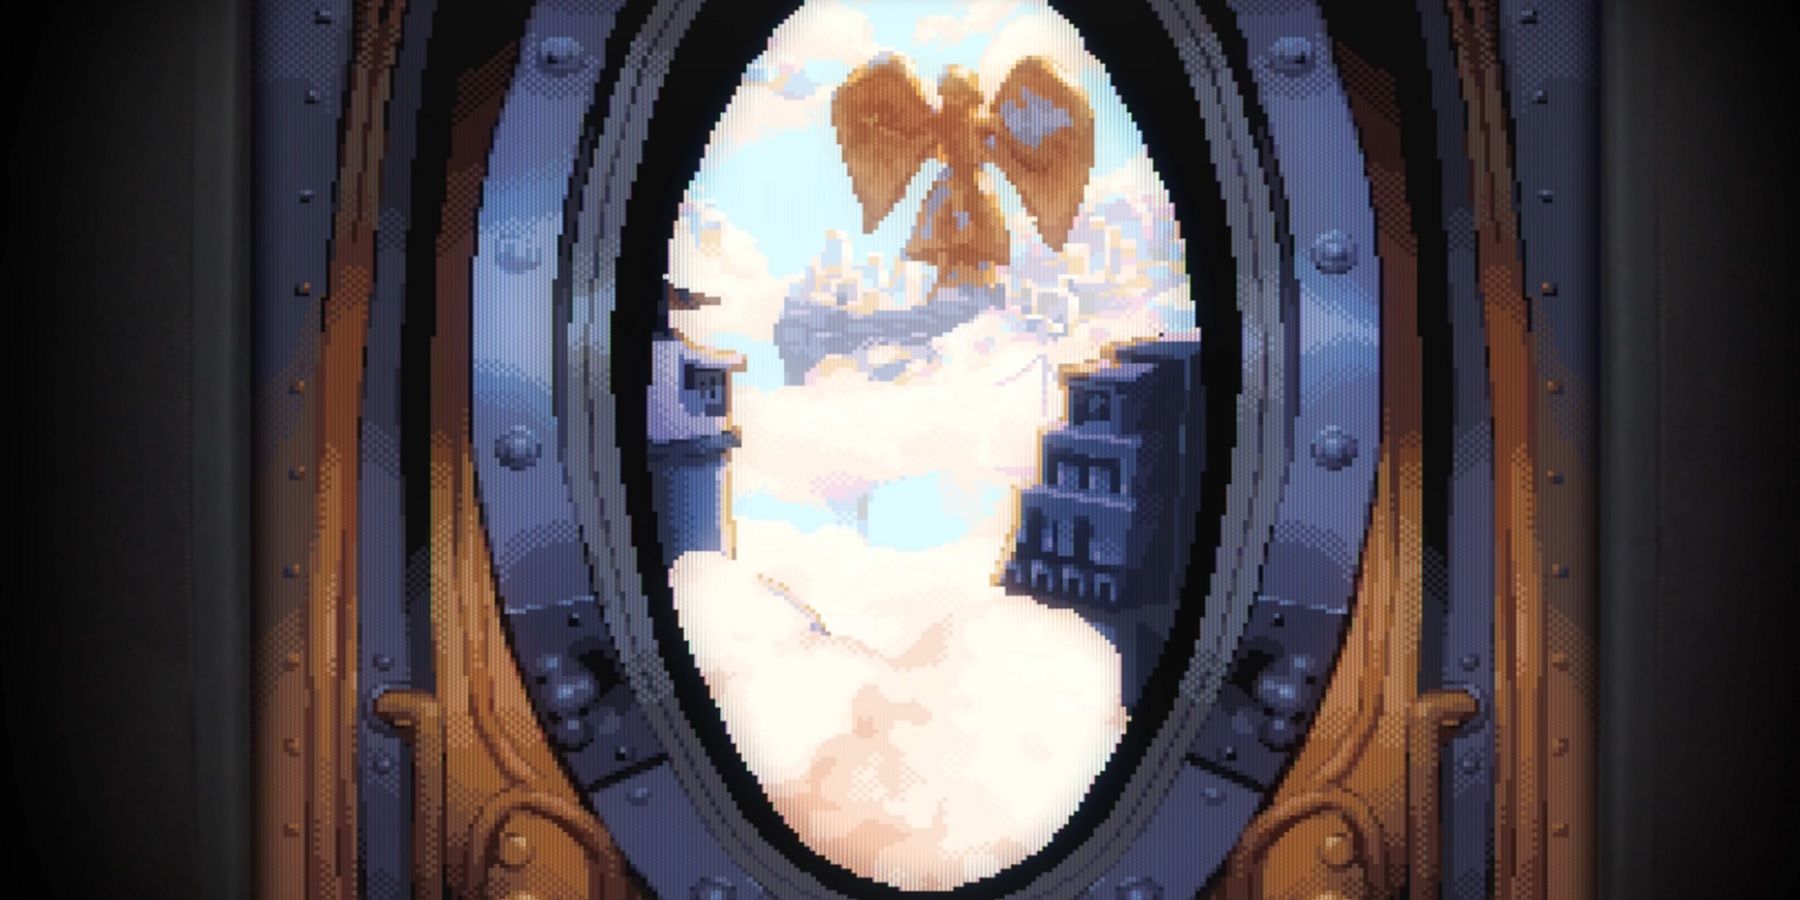 Image from the Bioshock Infinite skylift opening scene but done in 16 bit graphics.